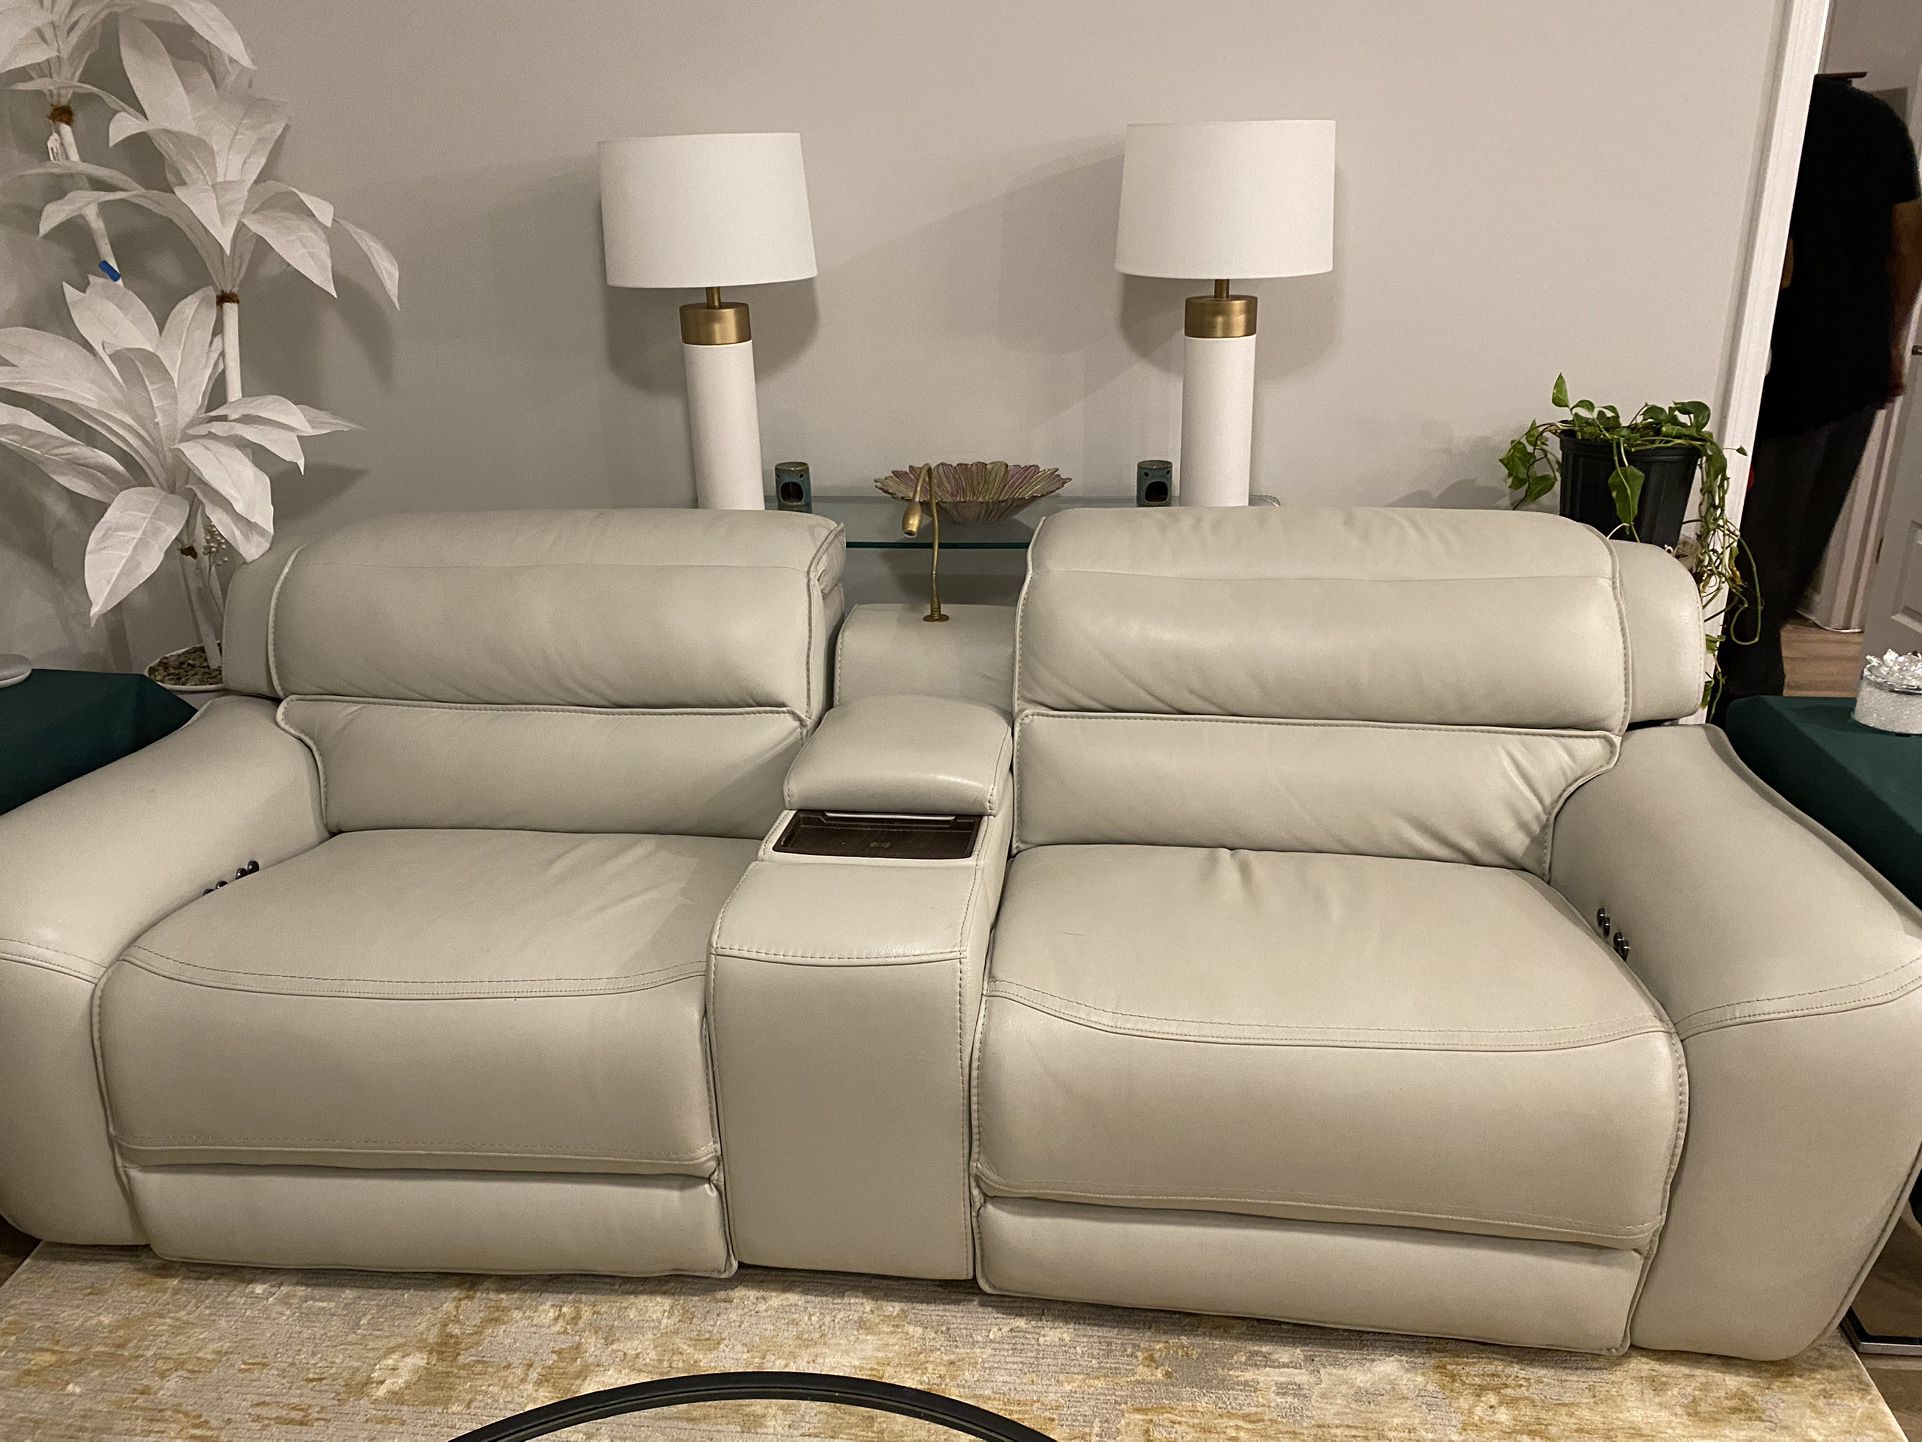 Cream Colored Leather Recliner Couch 